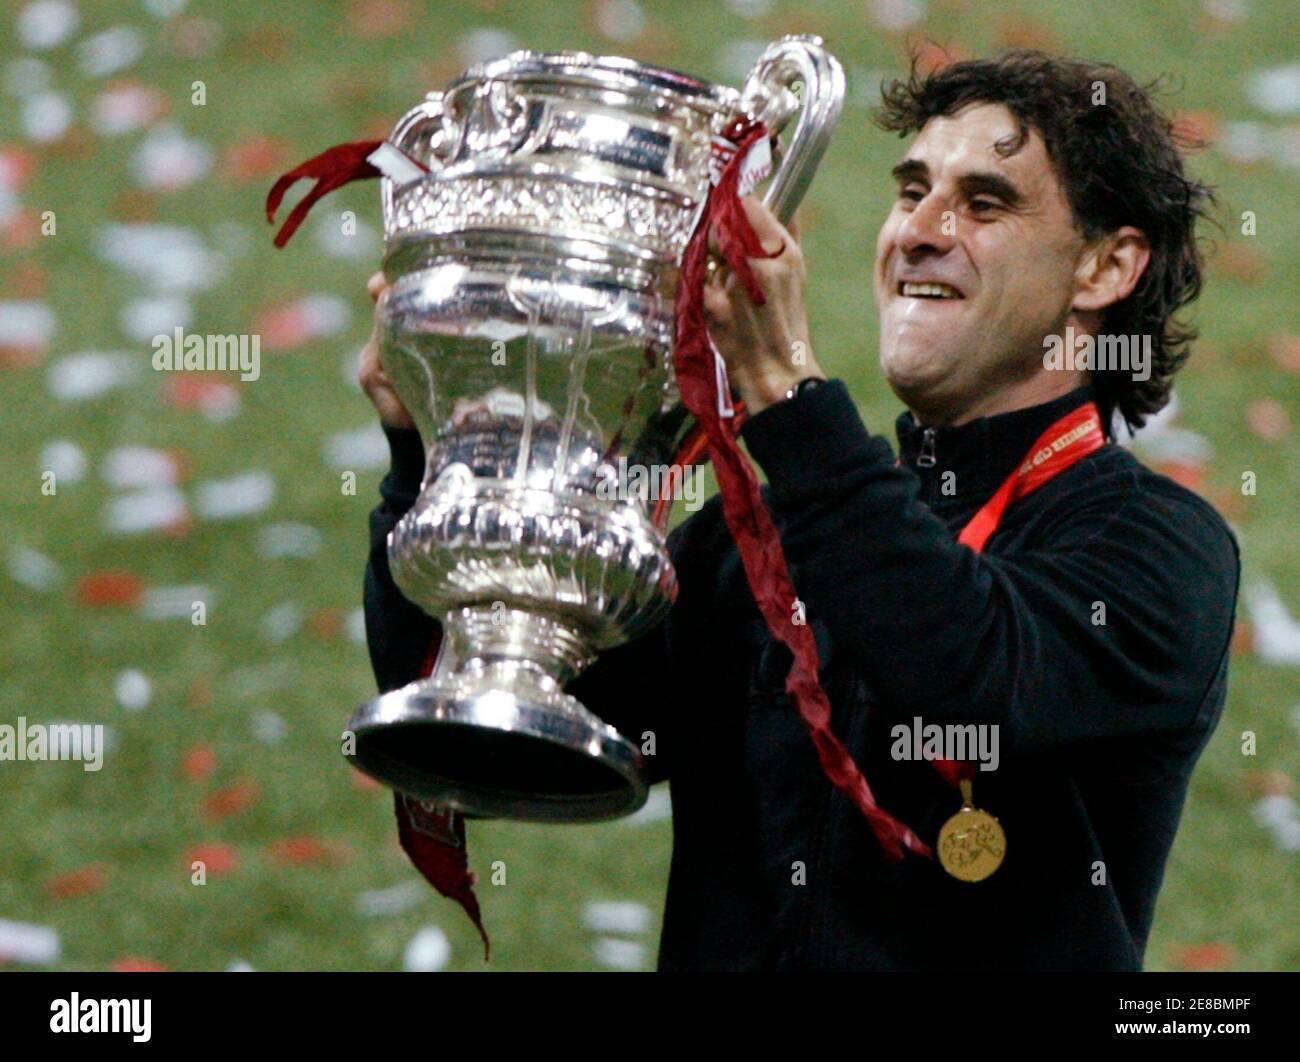 FC Sion's coach Didier Tholot raises his team's Swiss Cup trophy after  winning the Swiss Cup final soccer match against BSC Young Boys (YB) in  Bern May 20, 2009. REUTERS/Denis Balibouse (SWITZERLAND